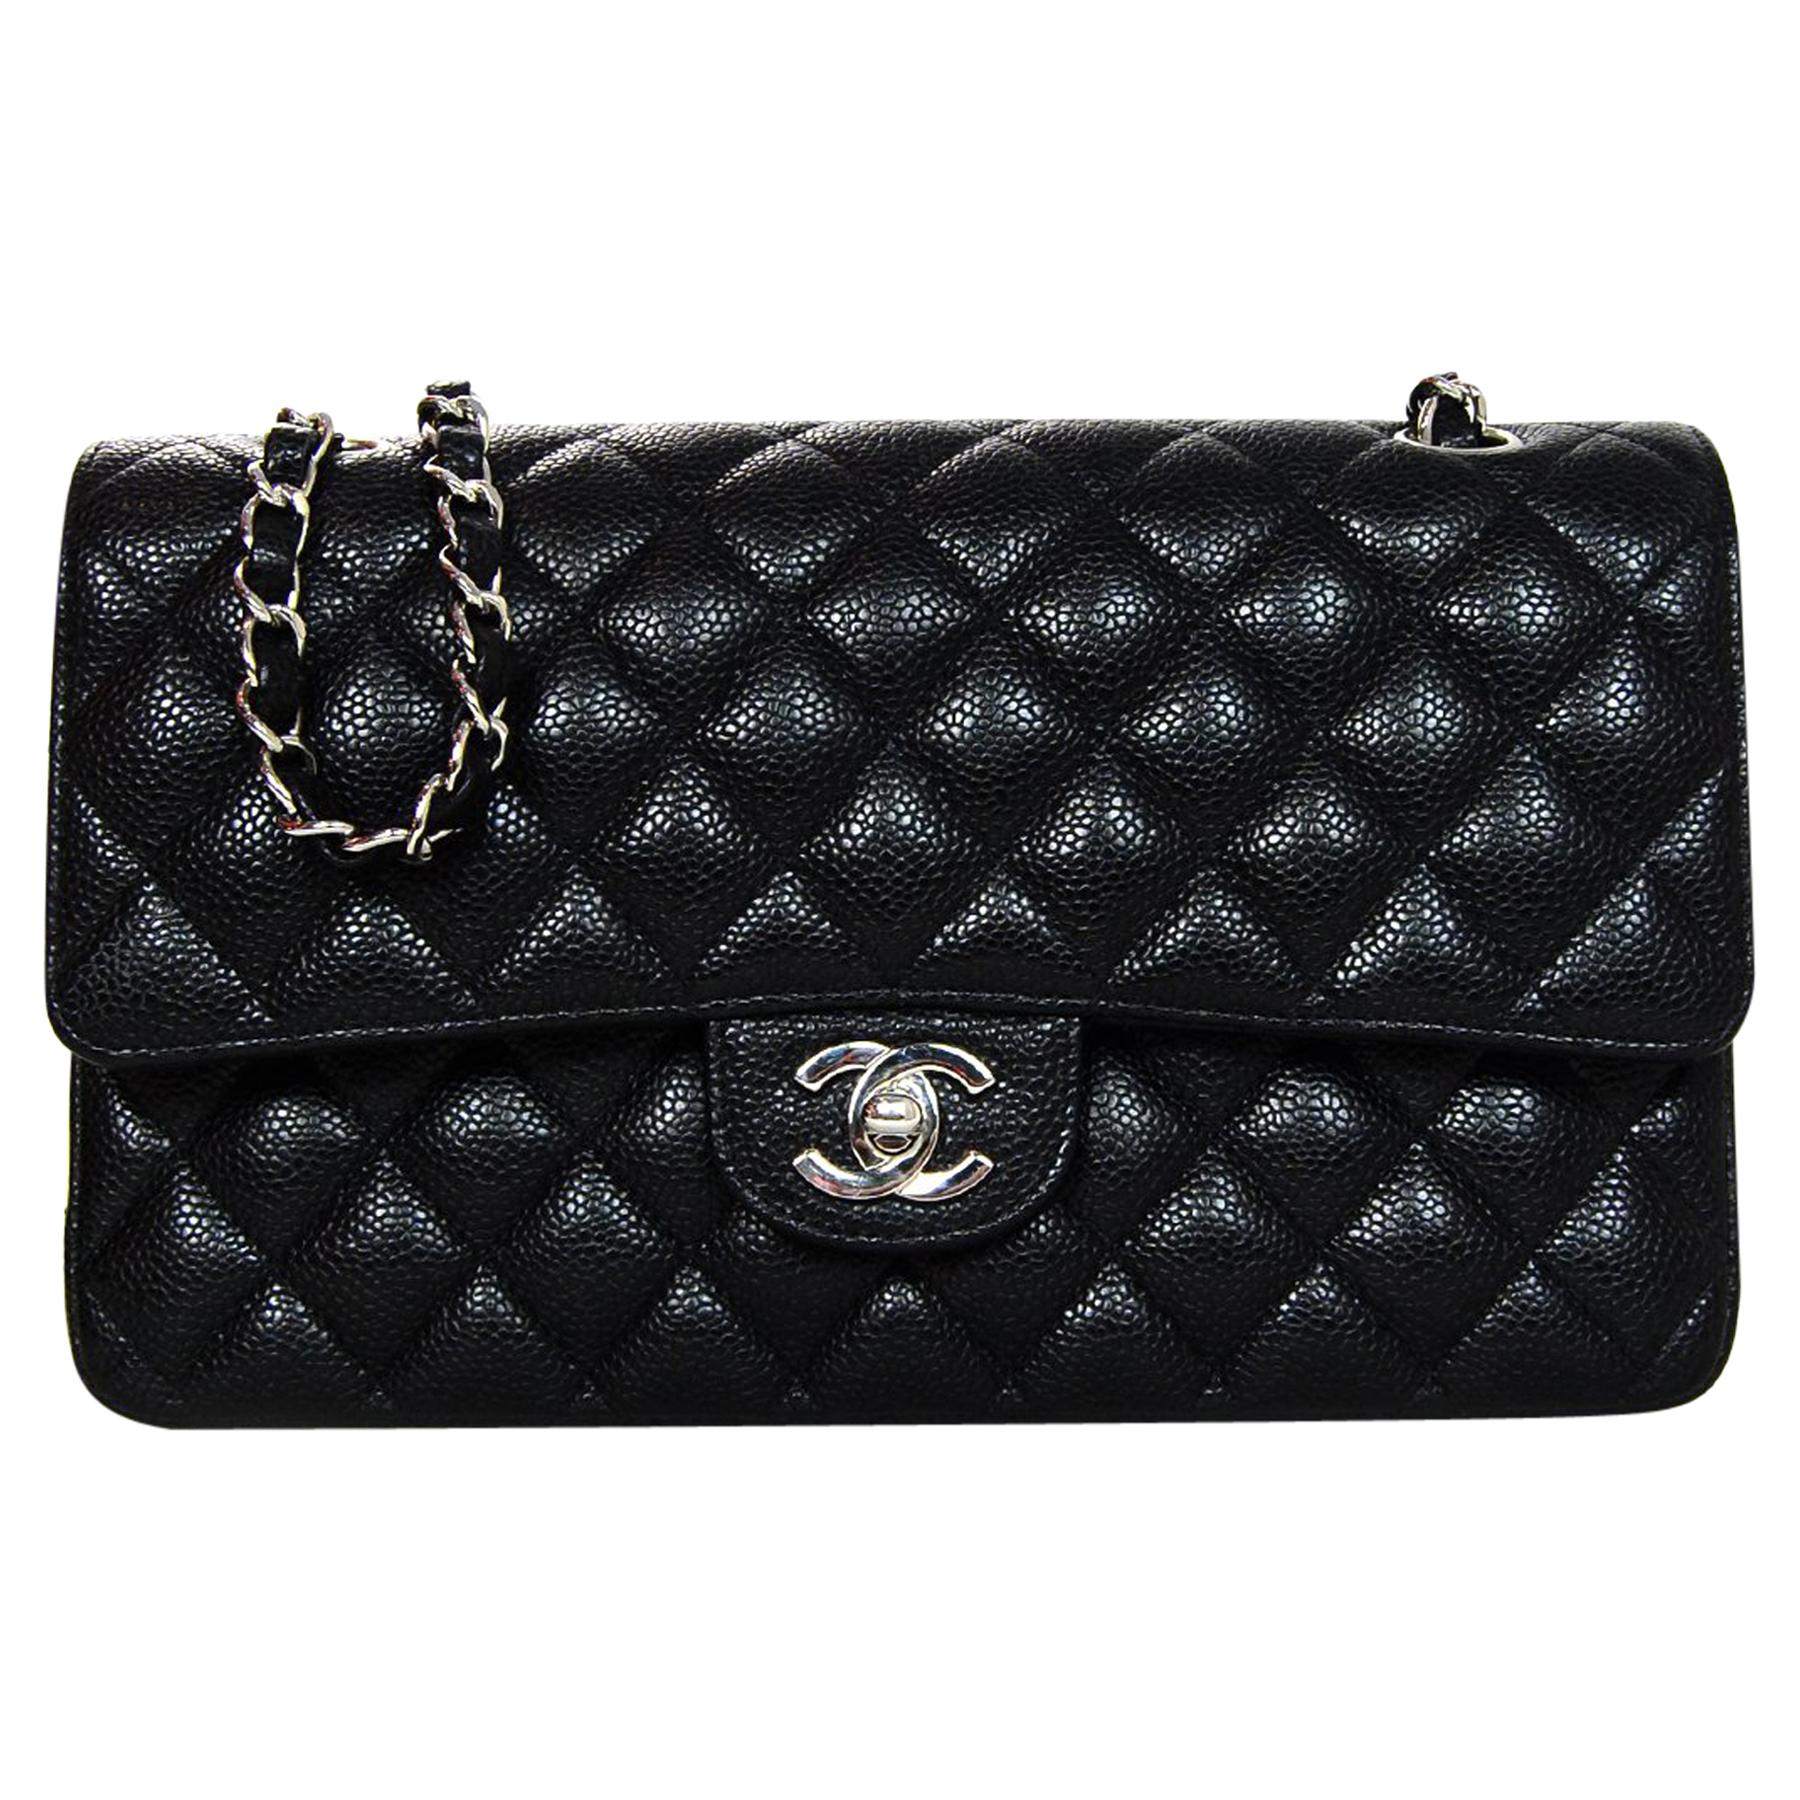 Chanel Black Quilted Caviar Leather Medium 10" Double Flap Classic Bag w. Silver